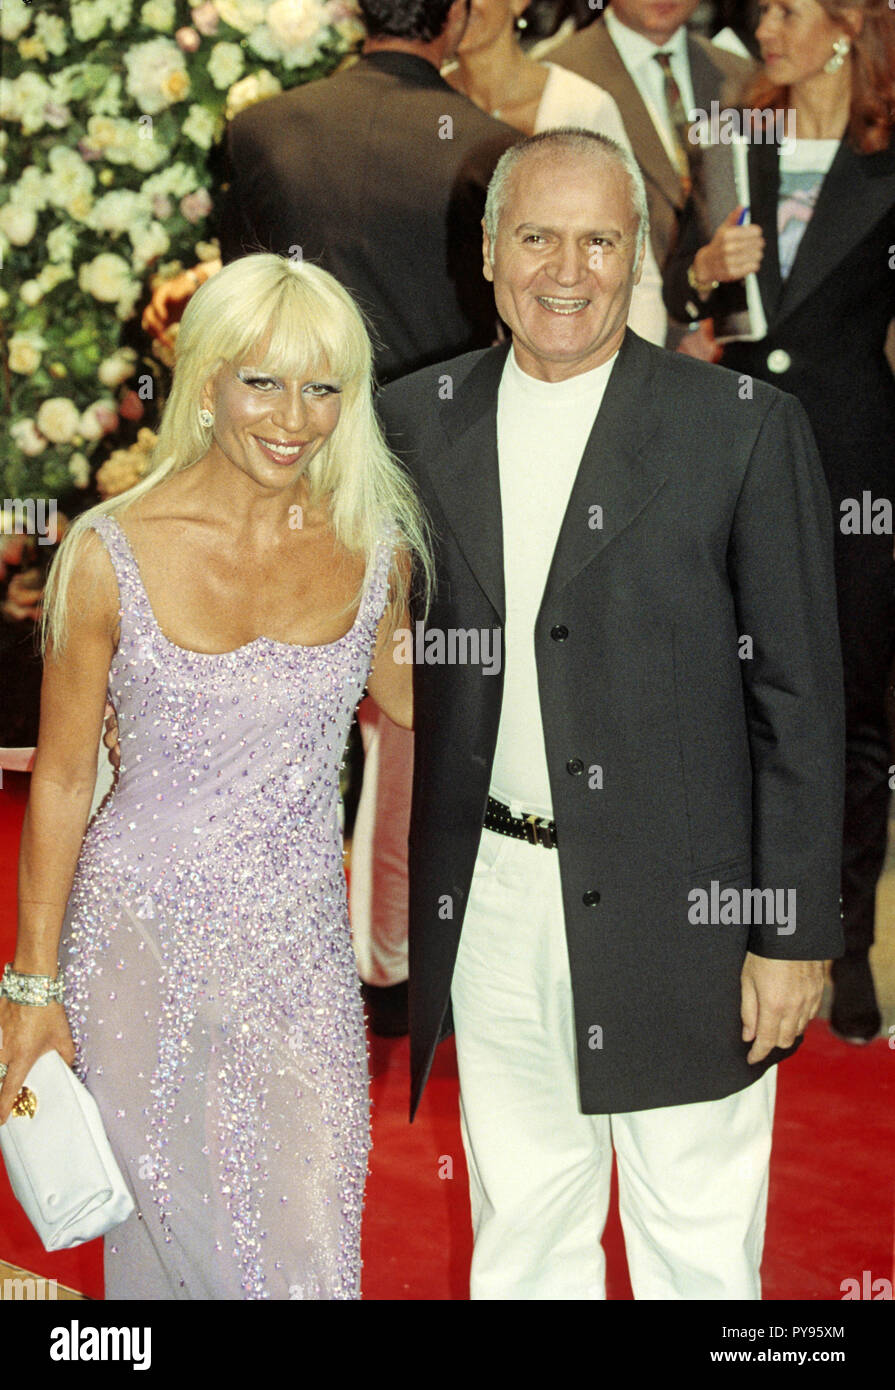 Gianni Versace arriving at his party in London, with Donatella Versace Â©  GRANATAIMAGES Featuring: Gianni Versace, Donatella Versace Where: United  Kingdom When: 17 Mar 2009 Credit: IPA/WENN.com **Only available for  publication in